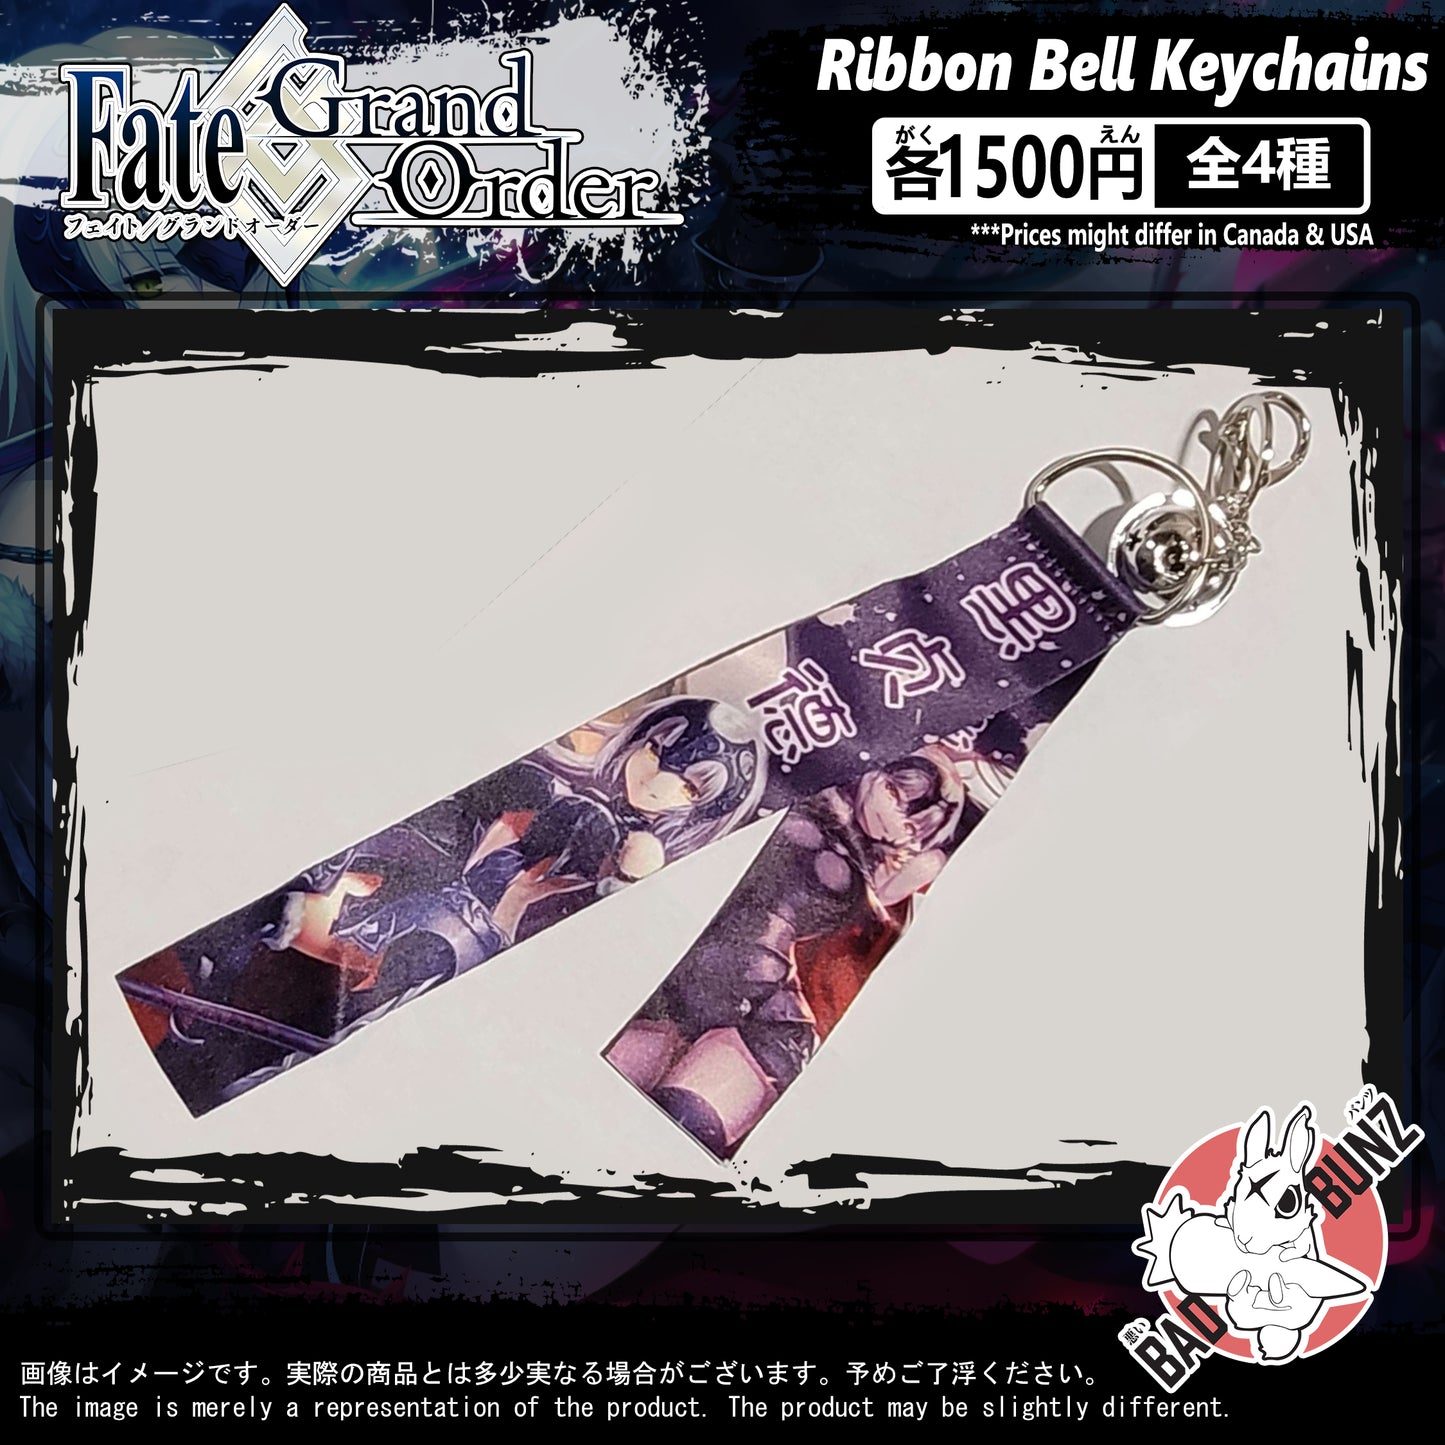 (FATE-01BELL) Fate Grand Order Anime Gaming Ribbon Bell Keychain